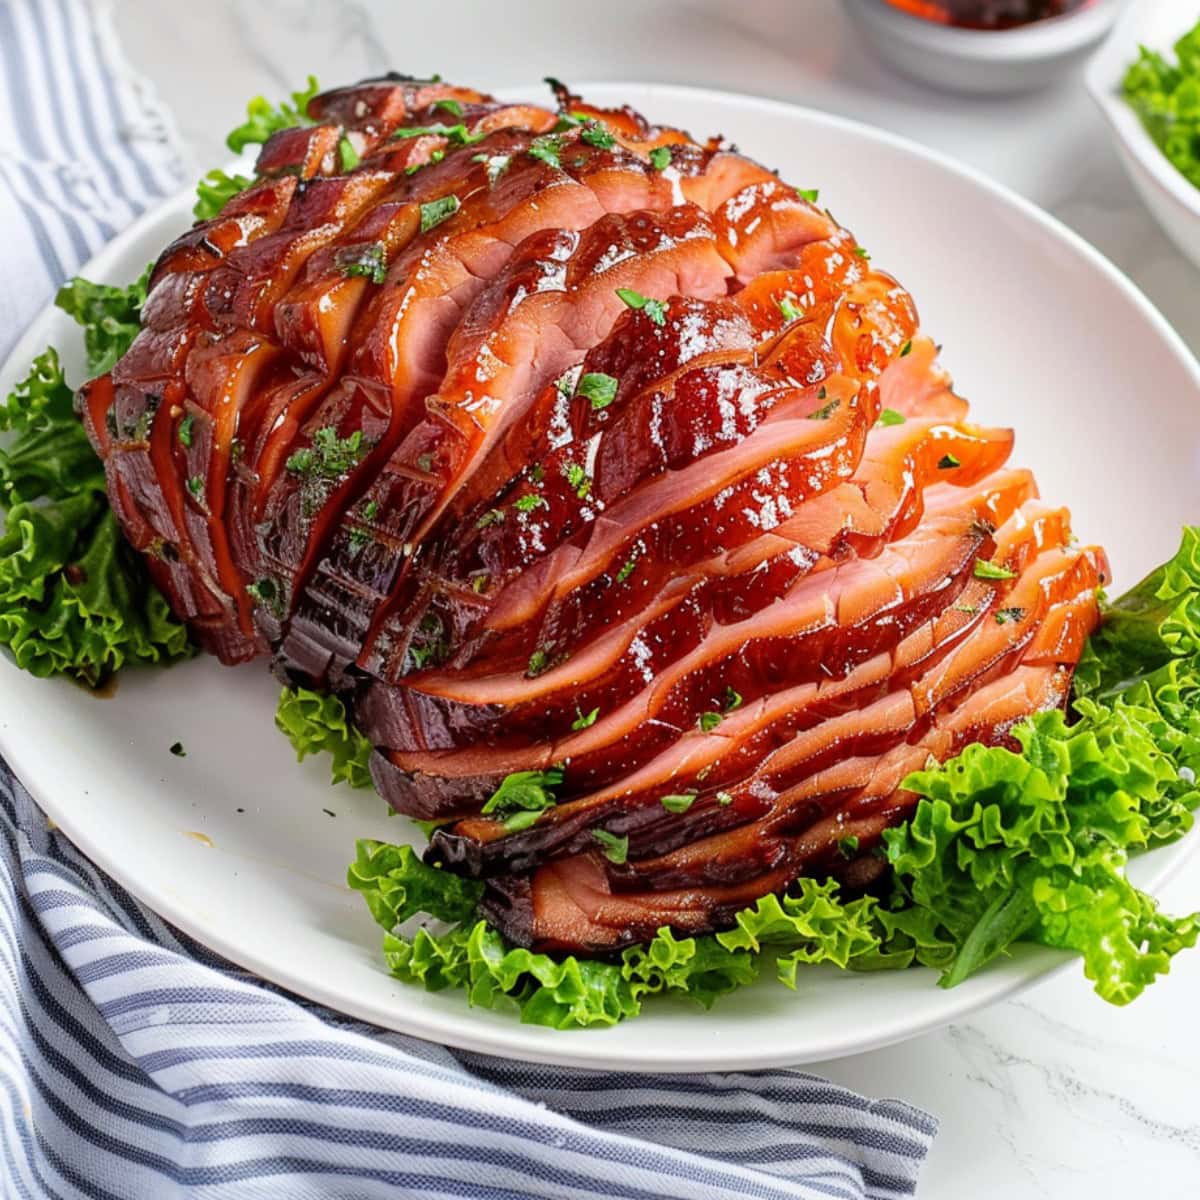 Flavorful Coca-Cola glazed ham, infused with the tangy-sweet taste of cola and aromatic spices